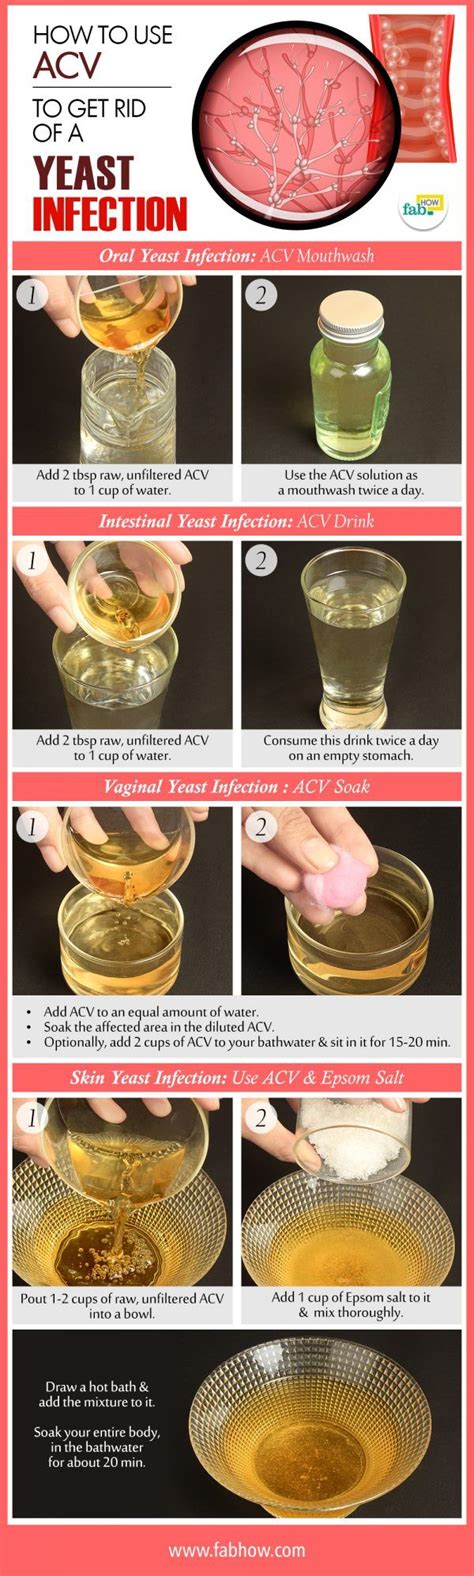 How To Use Apple Cider Vinegar To Get Rid Of A Yeast Infection